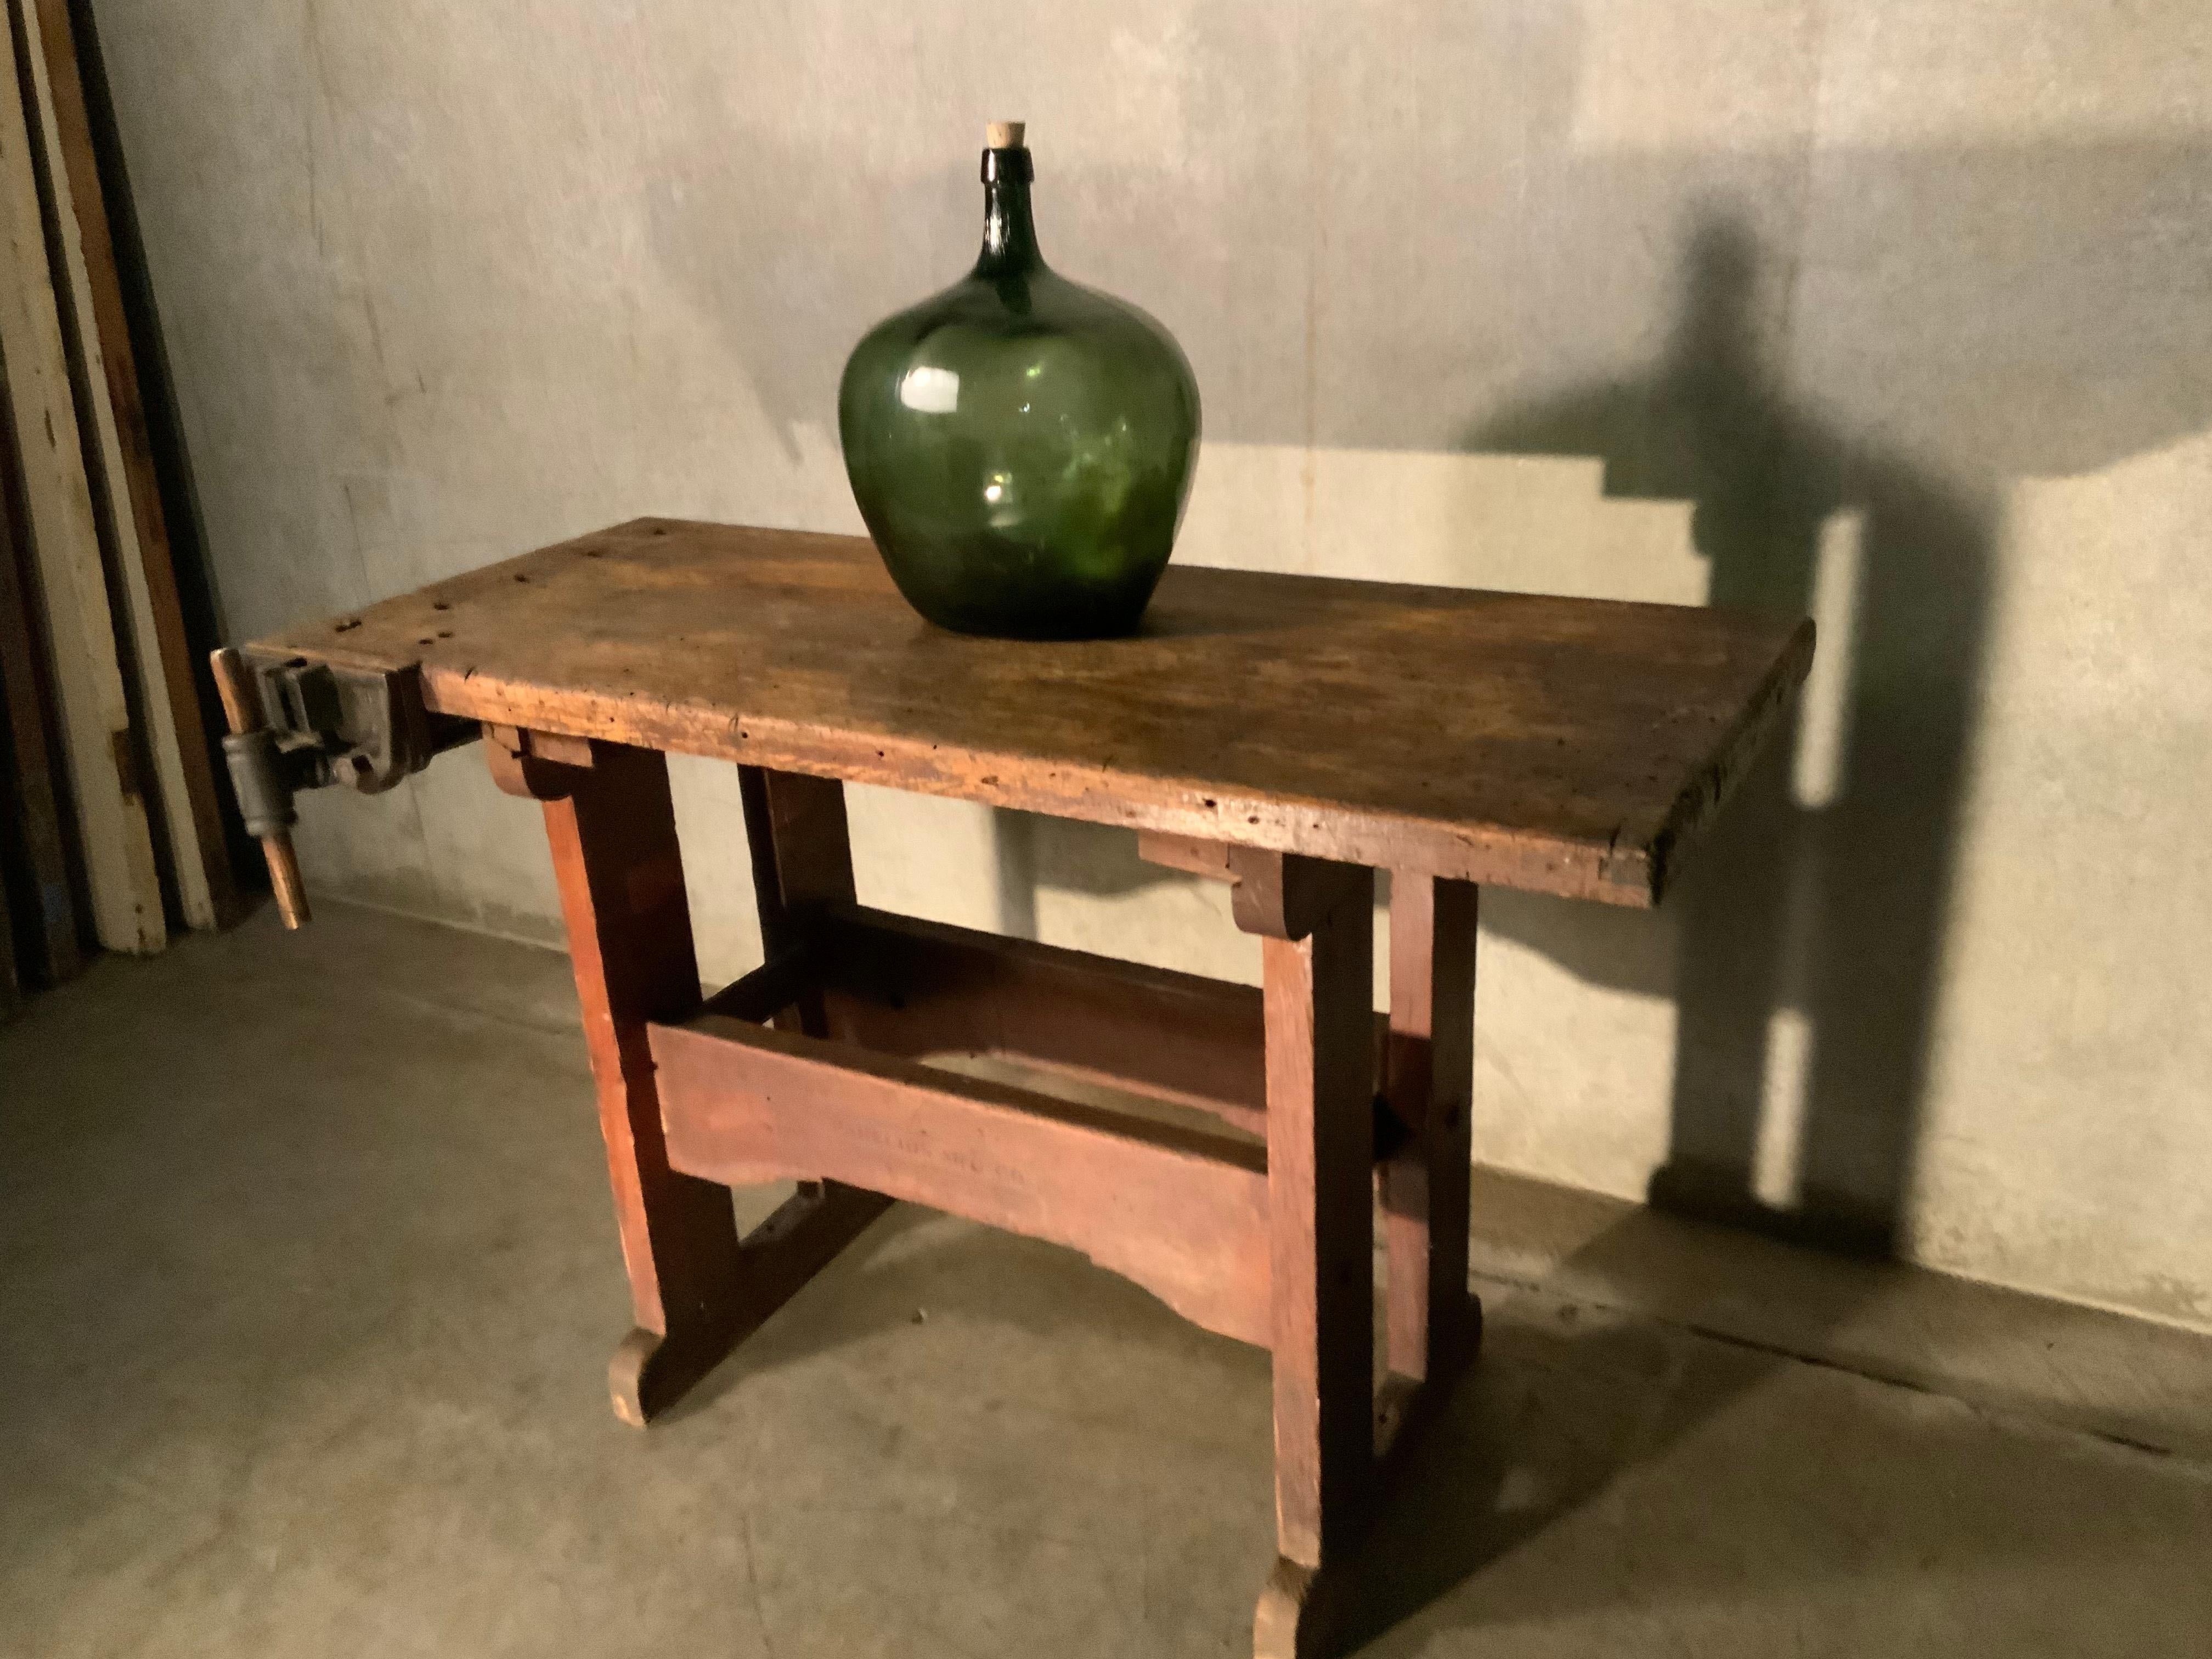 Beautiful example of a work bench in original condition, great size and wonderful patina.
Found in a school in Oregon.